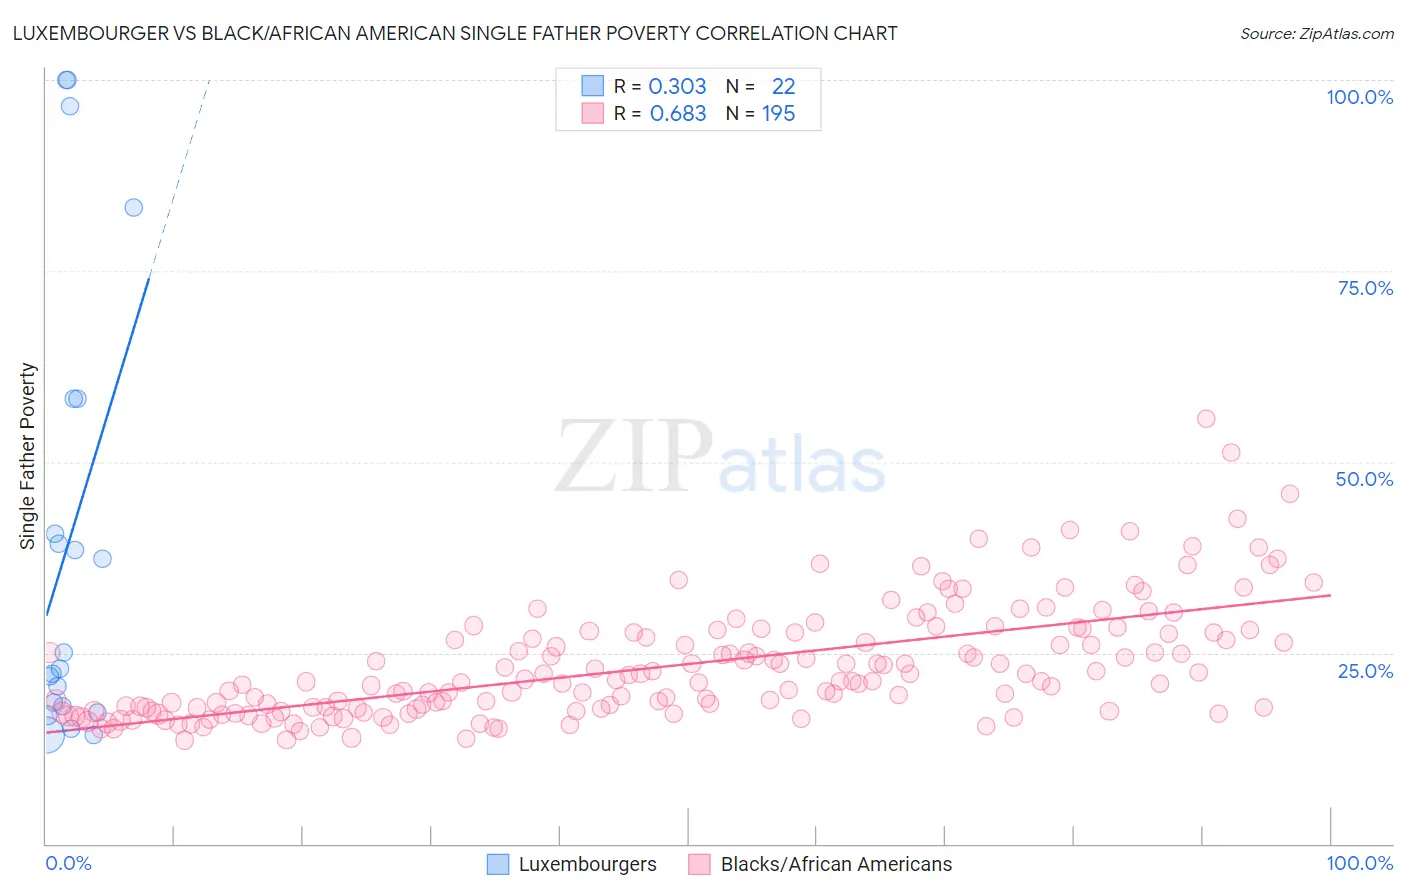 Luxembourger vs Black/African American Single Father Poverty